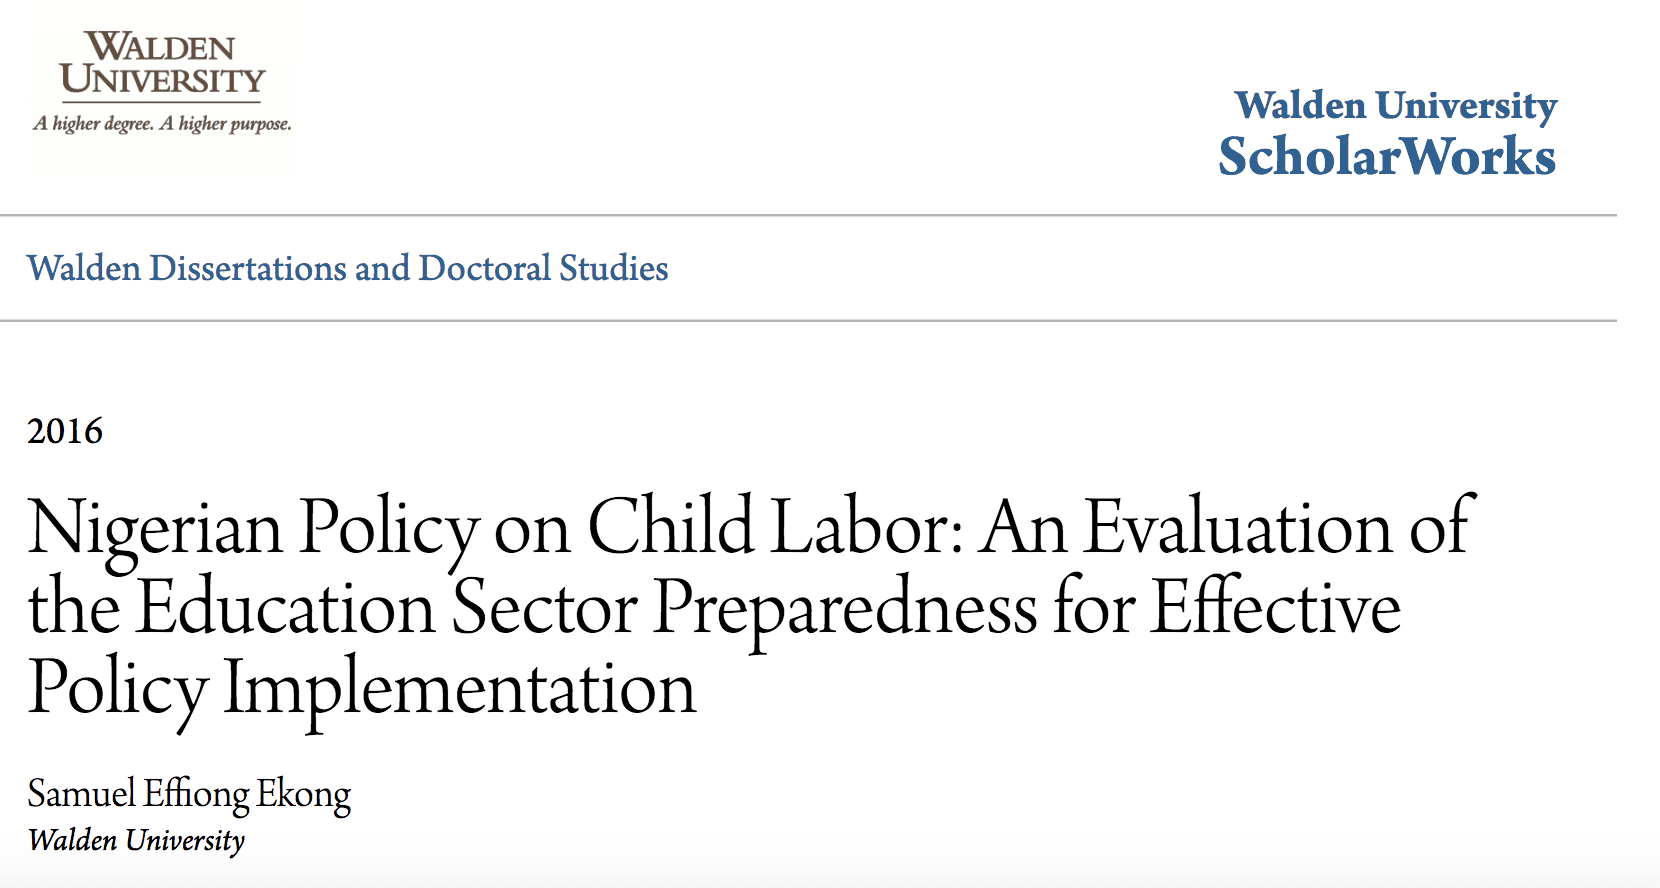 Nigerian Policy on Child Labor: An Evaluation of the Education Sector Preparedness for Effective Policy Implementation